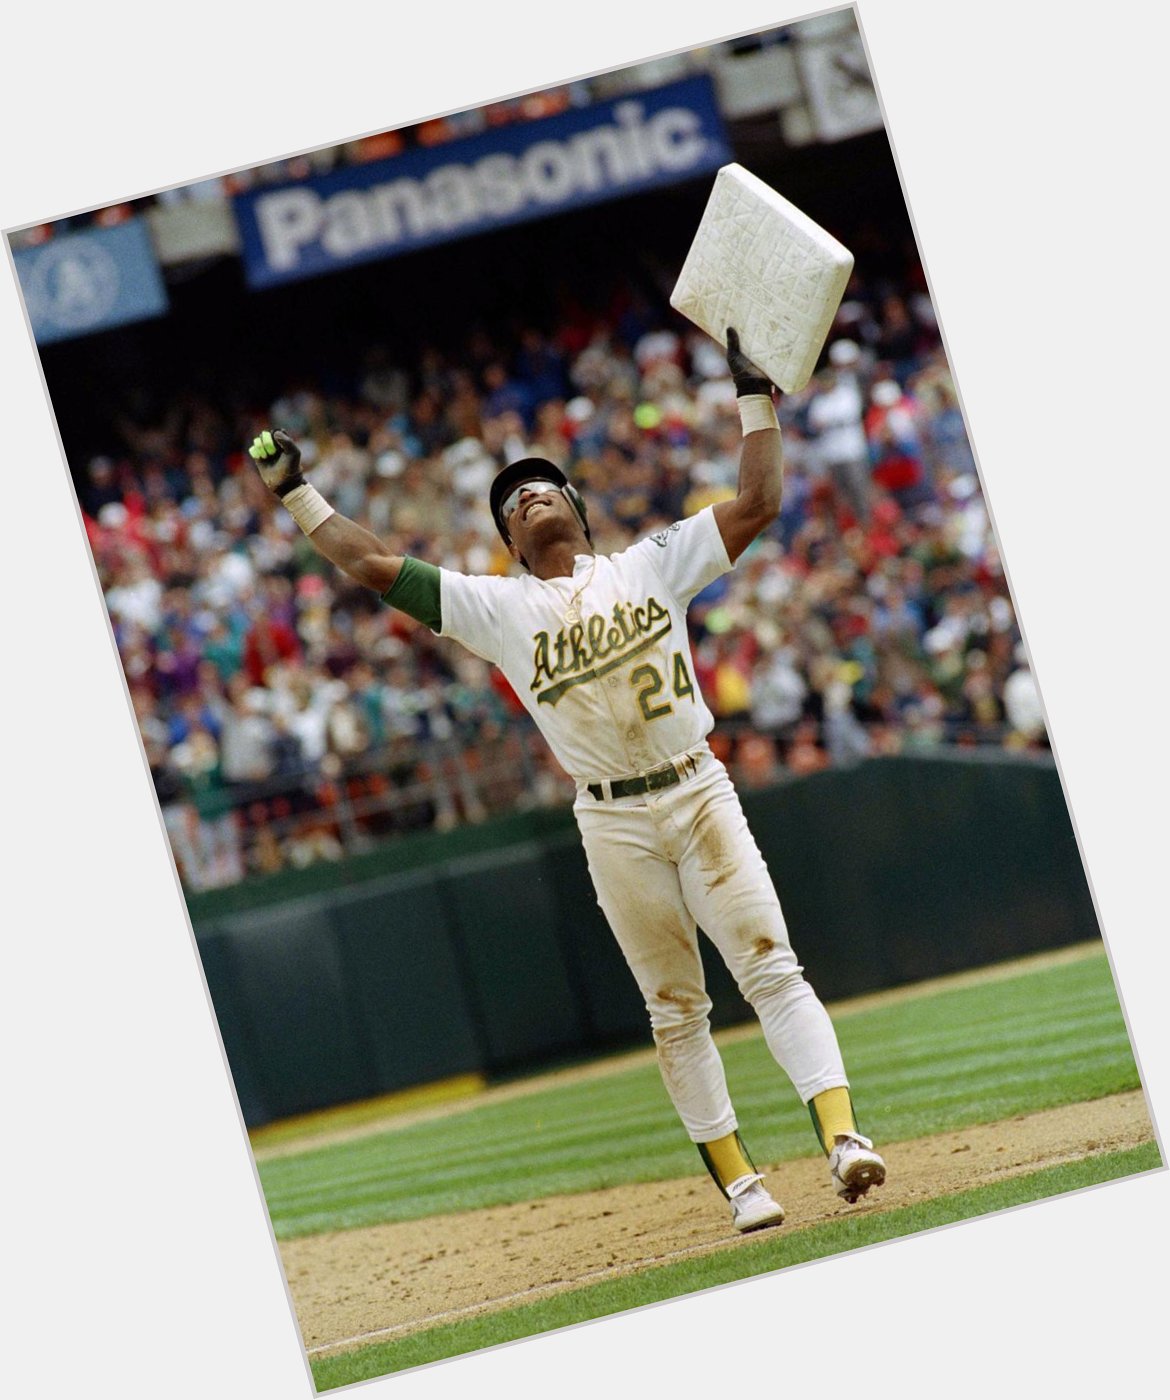 Merry Christmas to all and a happy birthday to Rickey Henderson, who turns 57 today. 